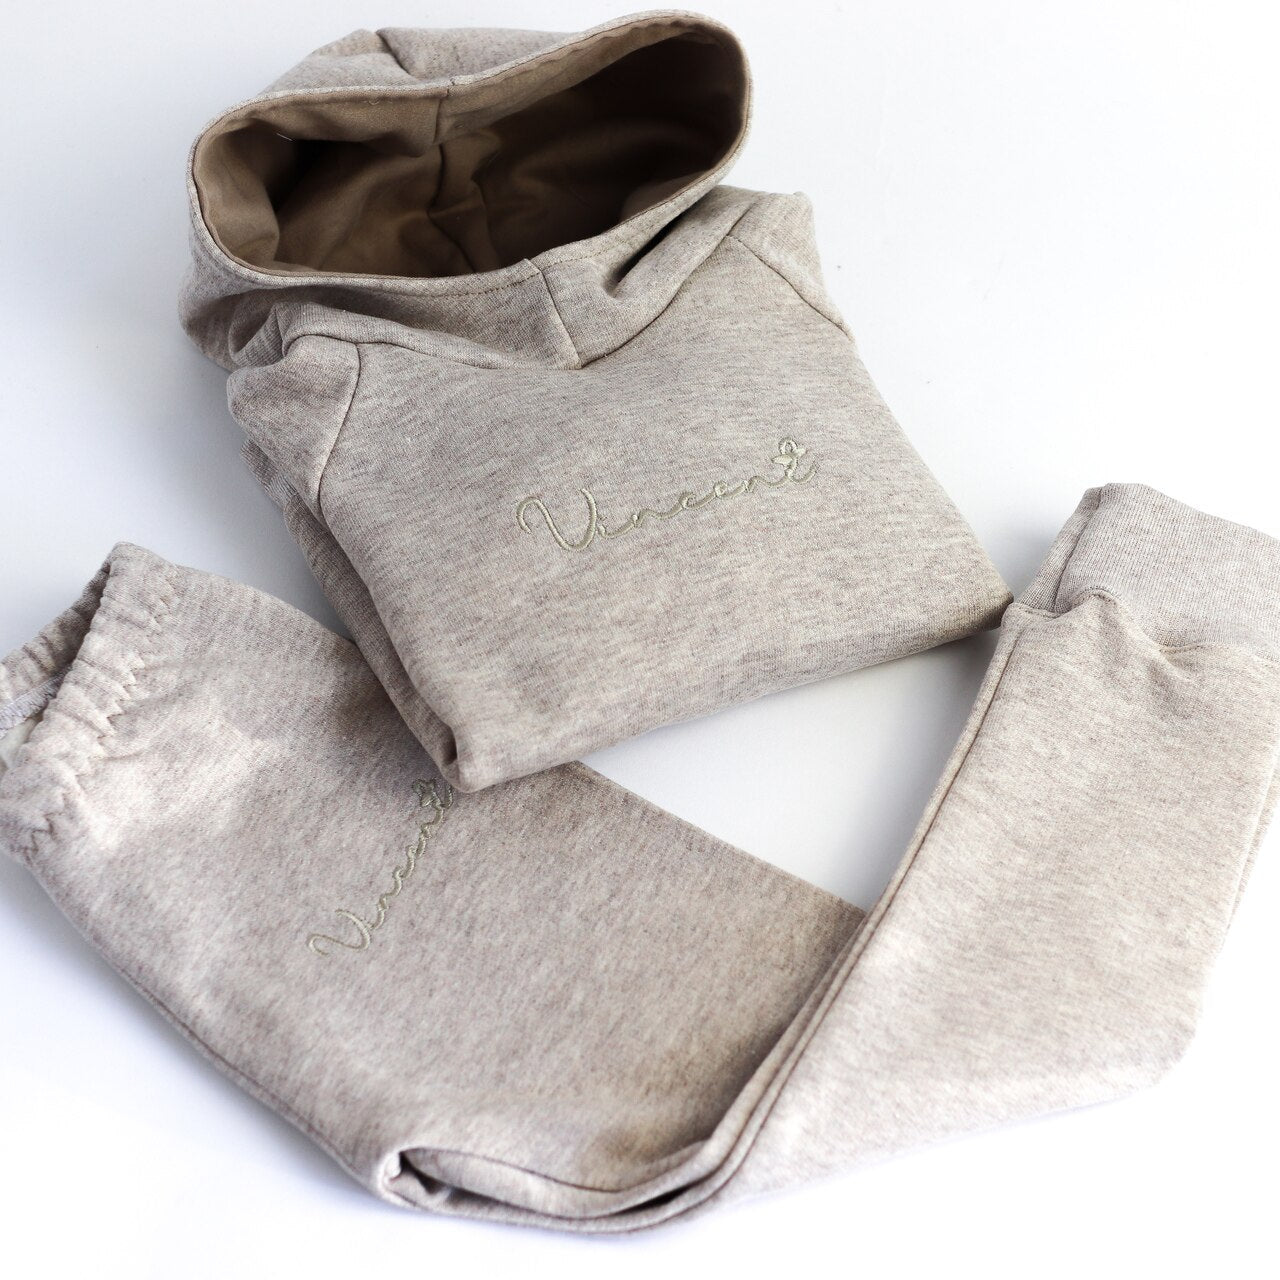 Oatmeal Fleece Backed Cross Neck Hooded Top Full Lounge Set With Stone Lining (Made to Order)